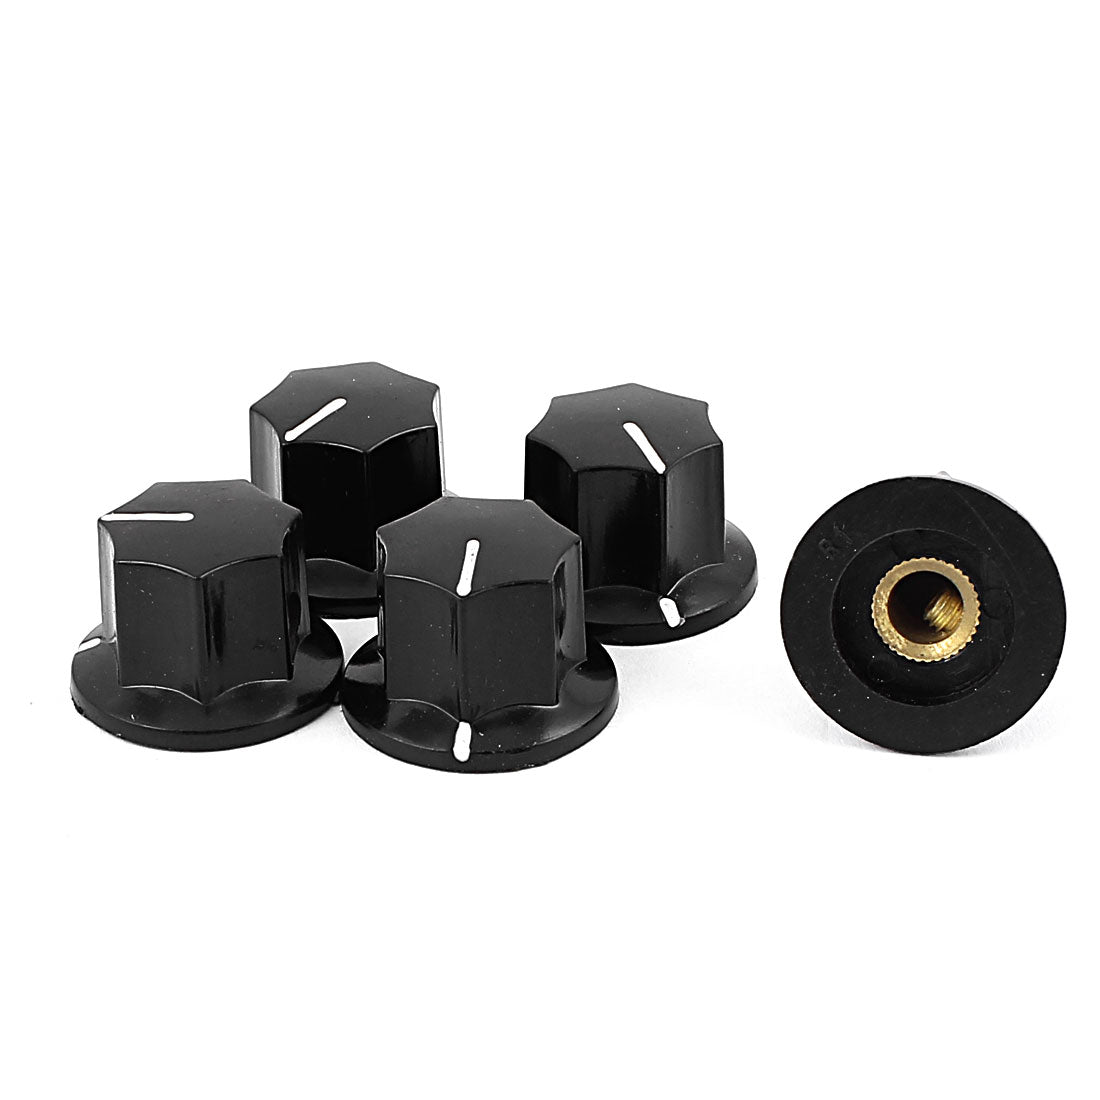 uxcell Uxcell 5 Pcs Potentiometer Control Switch Volume Caps Knurled Button Cap 6mm Diameter Black